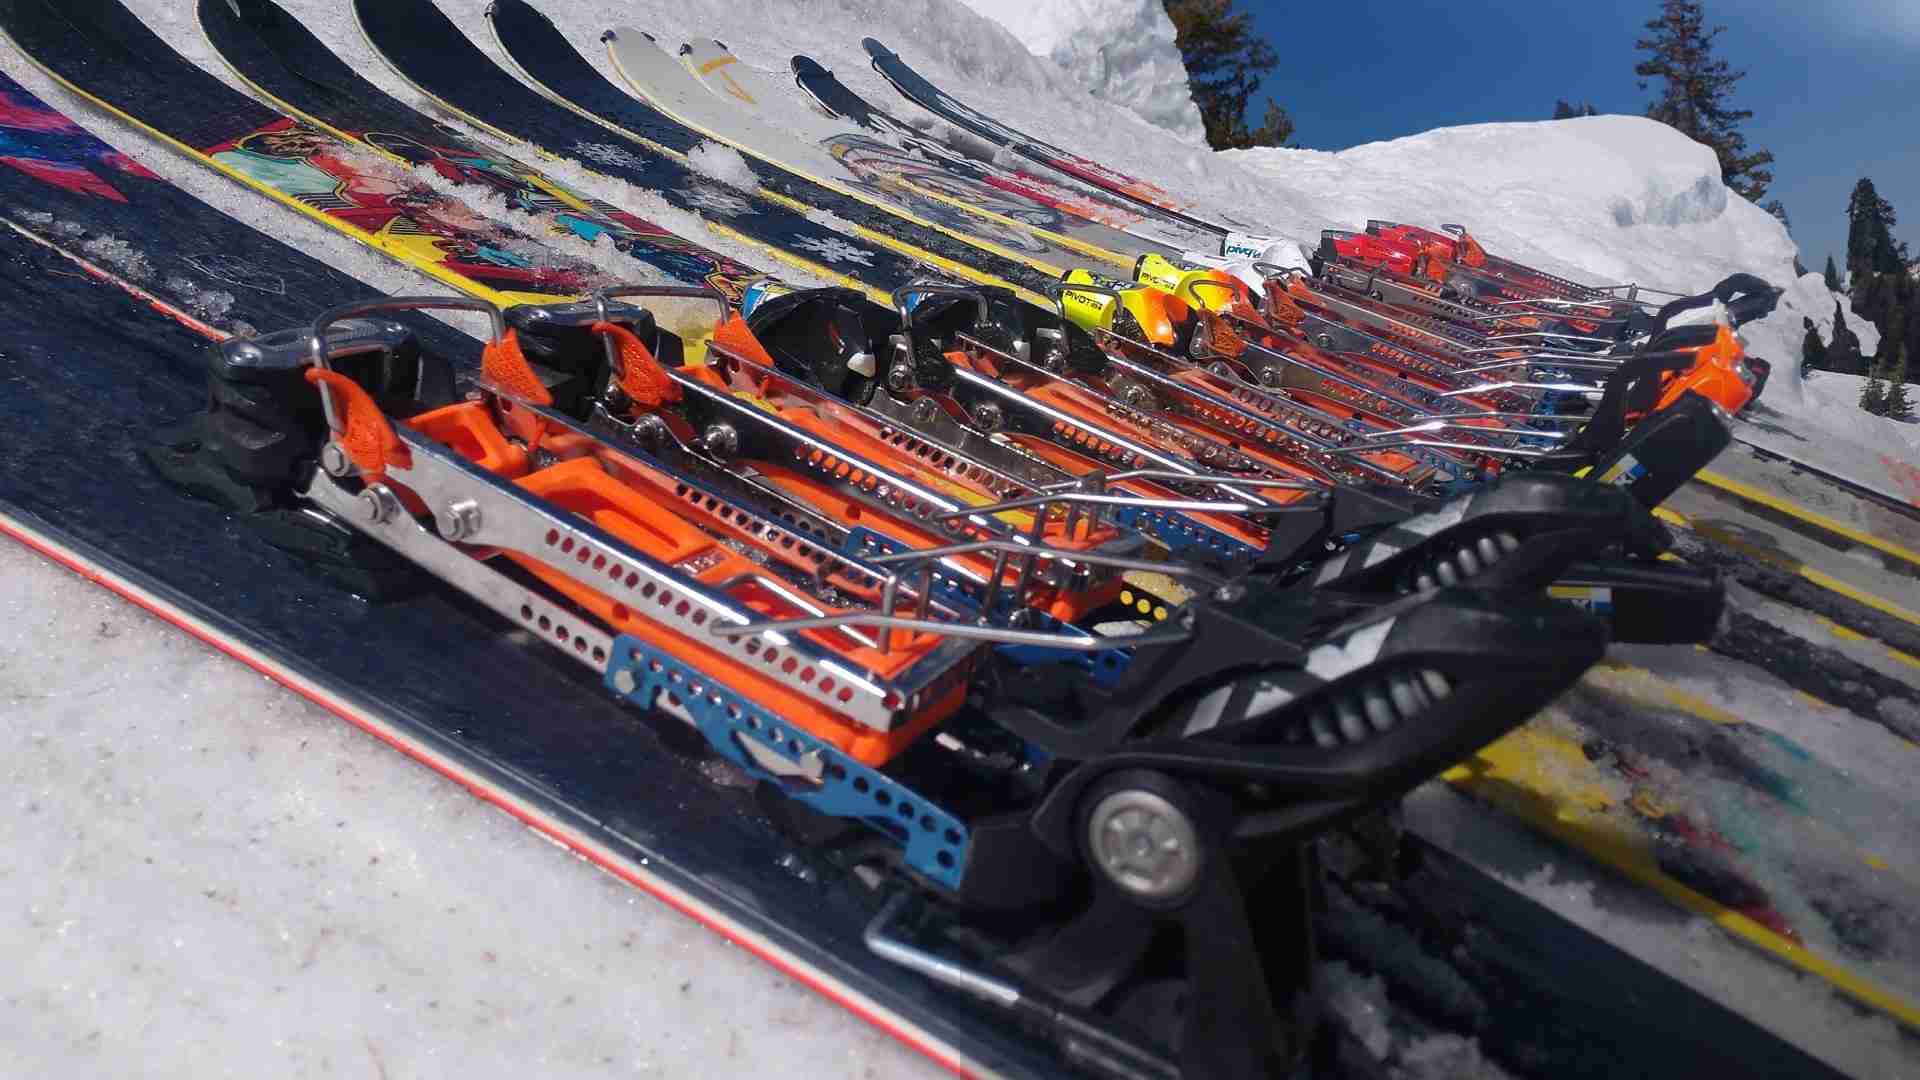 DAYMAKER TOURING | Alpine Touring Bindings by Daymakers